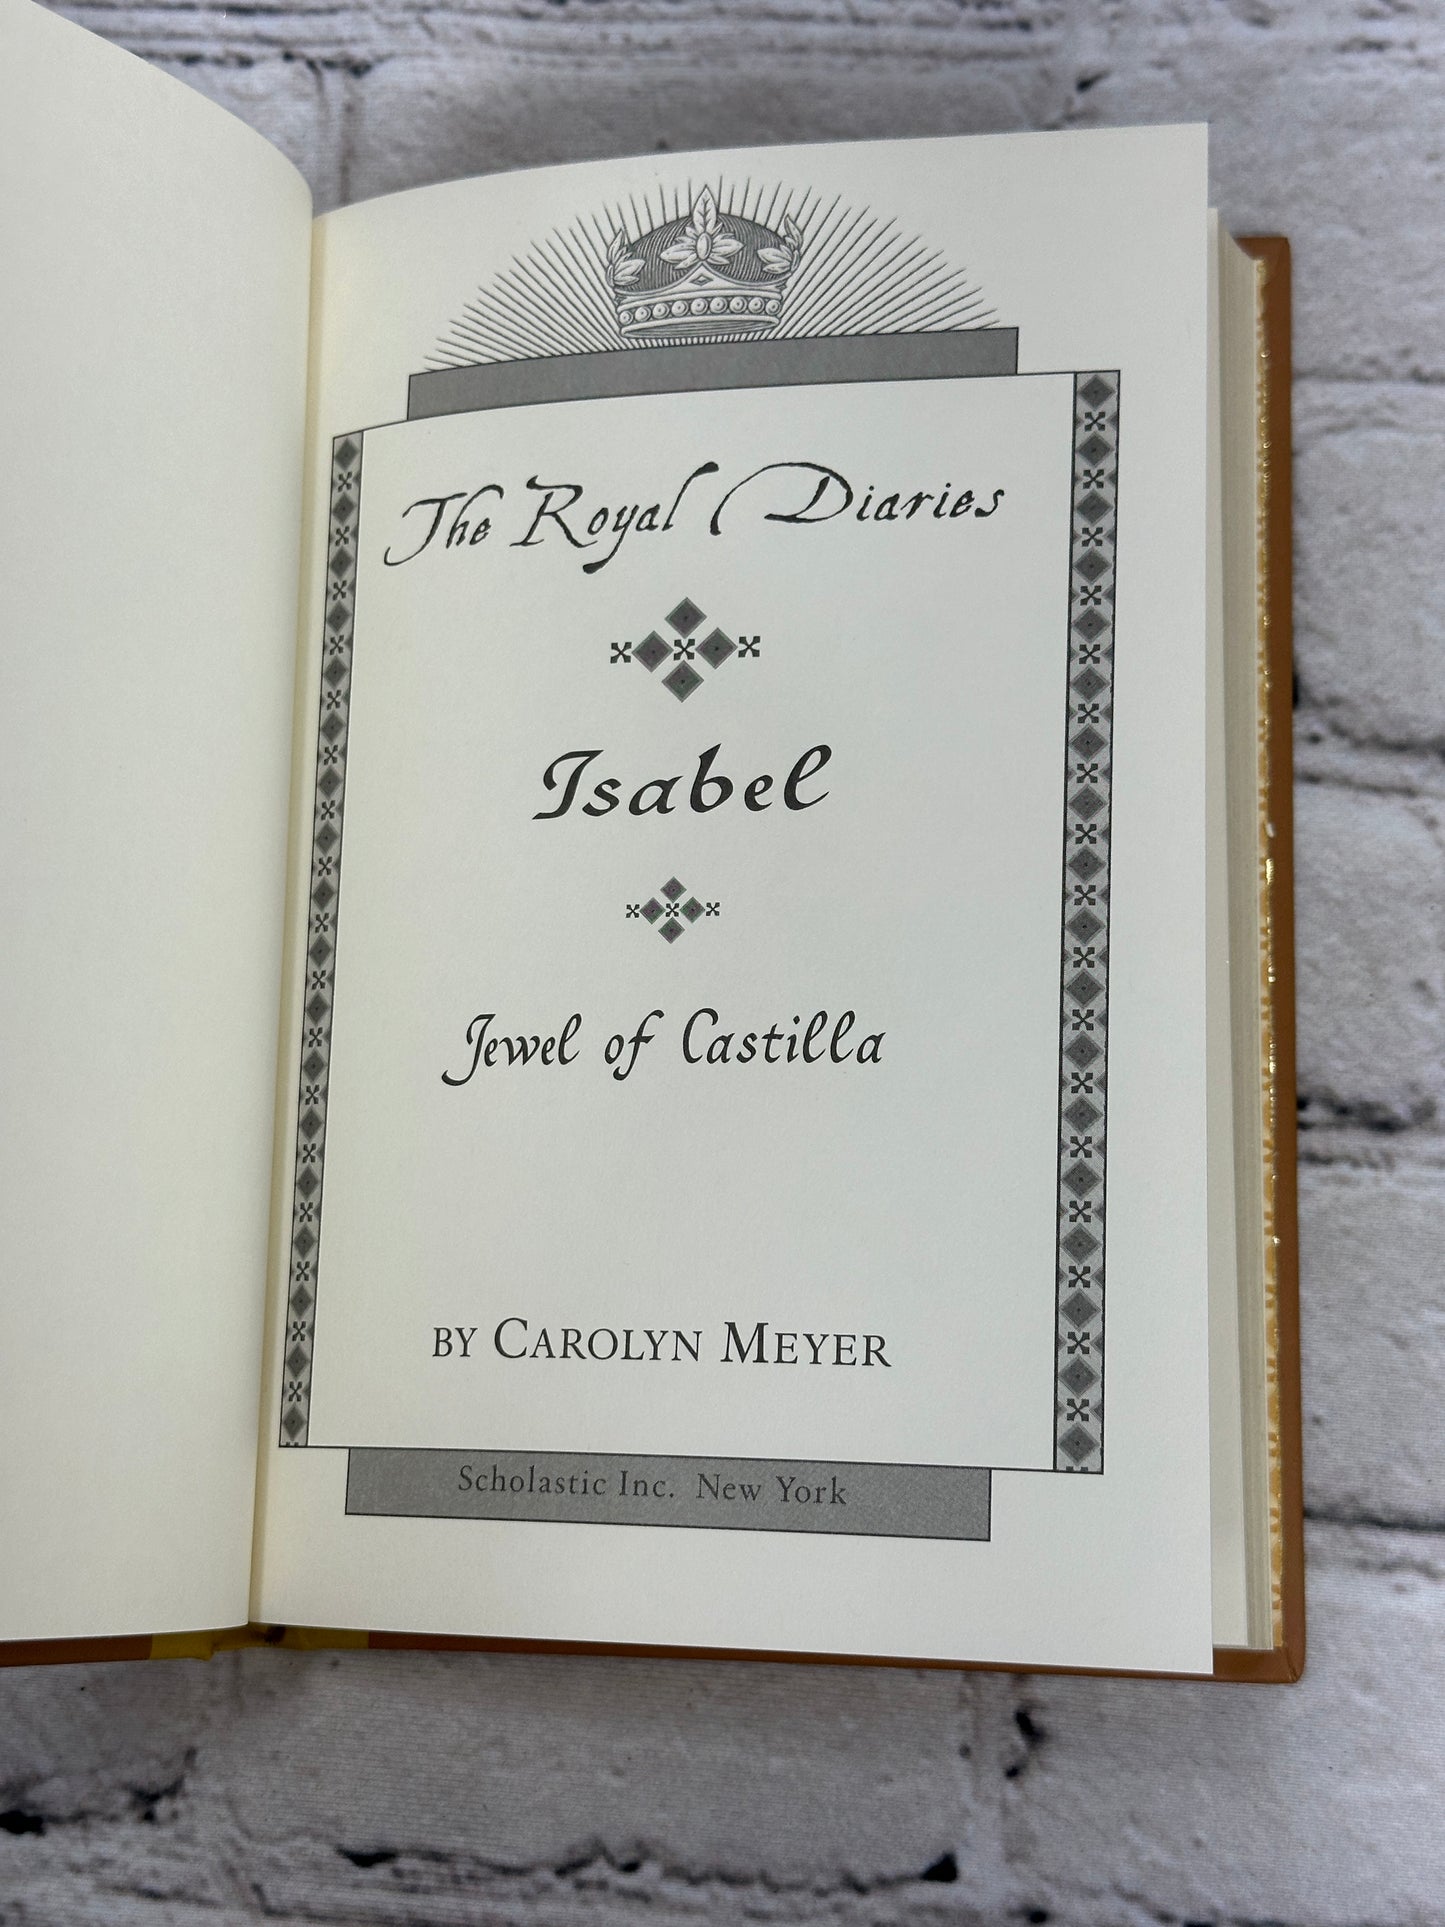 The Royal Diaries: Isabel Jewel of Castilla, Spain 1466 by Carolyn Meyer [2000]